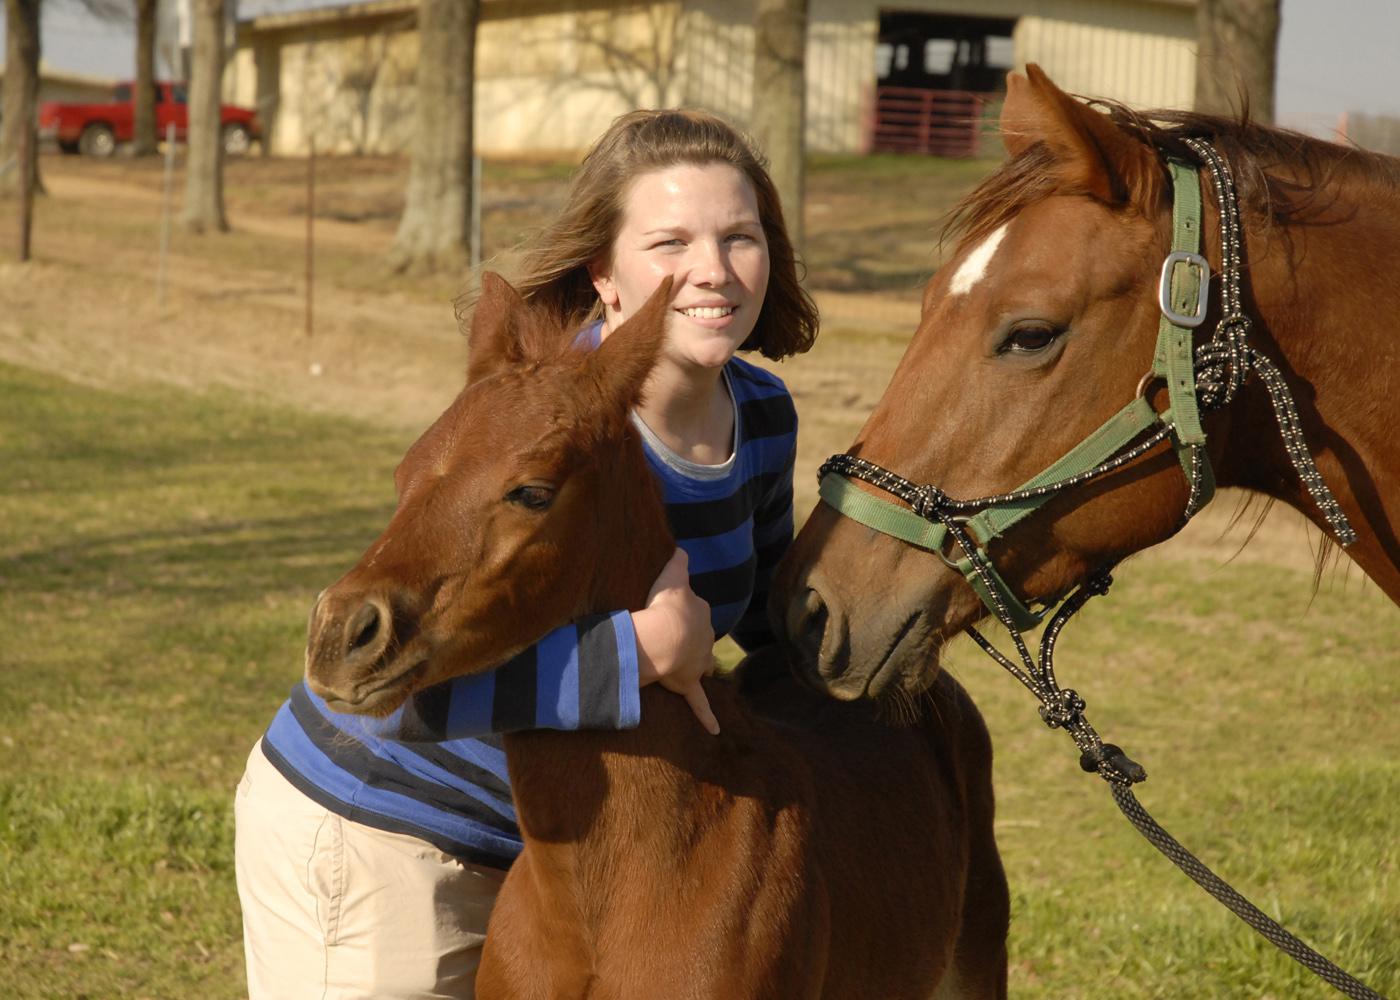 Dr. Joy Mordecai, an equine reproduction resident at Mississippi State University's College of Veterinary Medicine, holds Freddie Mac, one of the twin foals from a champion cutting horse, while its surrogate mother keeps a close eye on her colt. (Photo by Linda Breazeale)